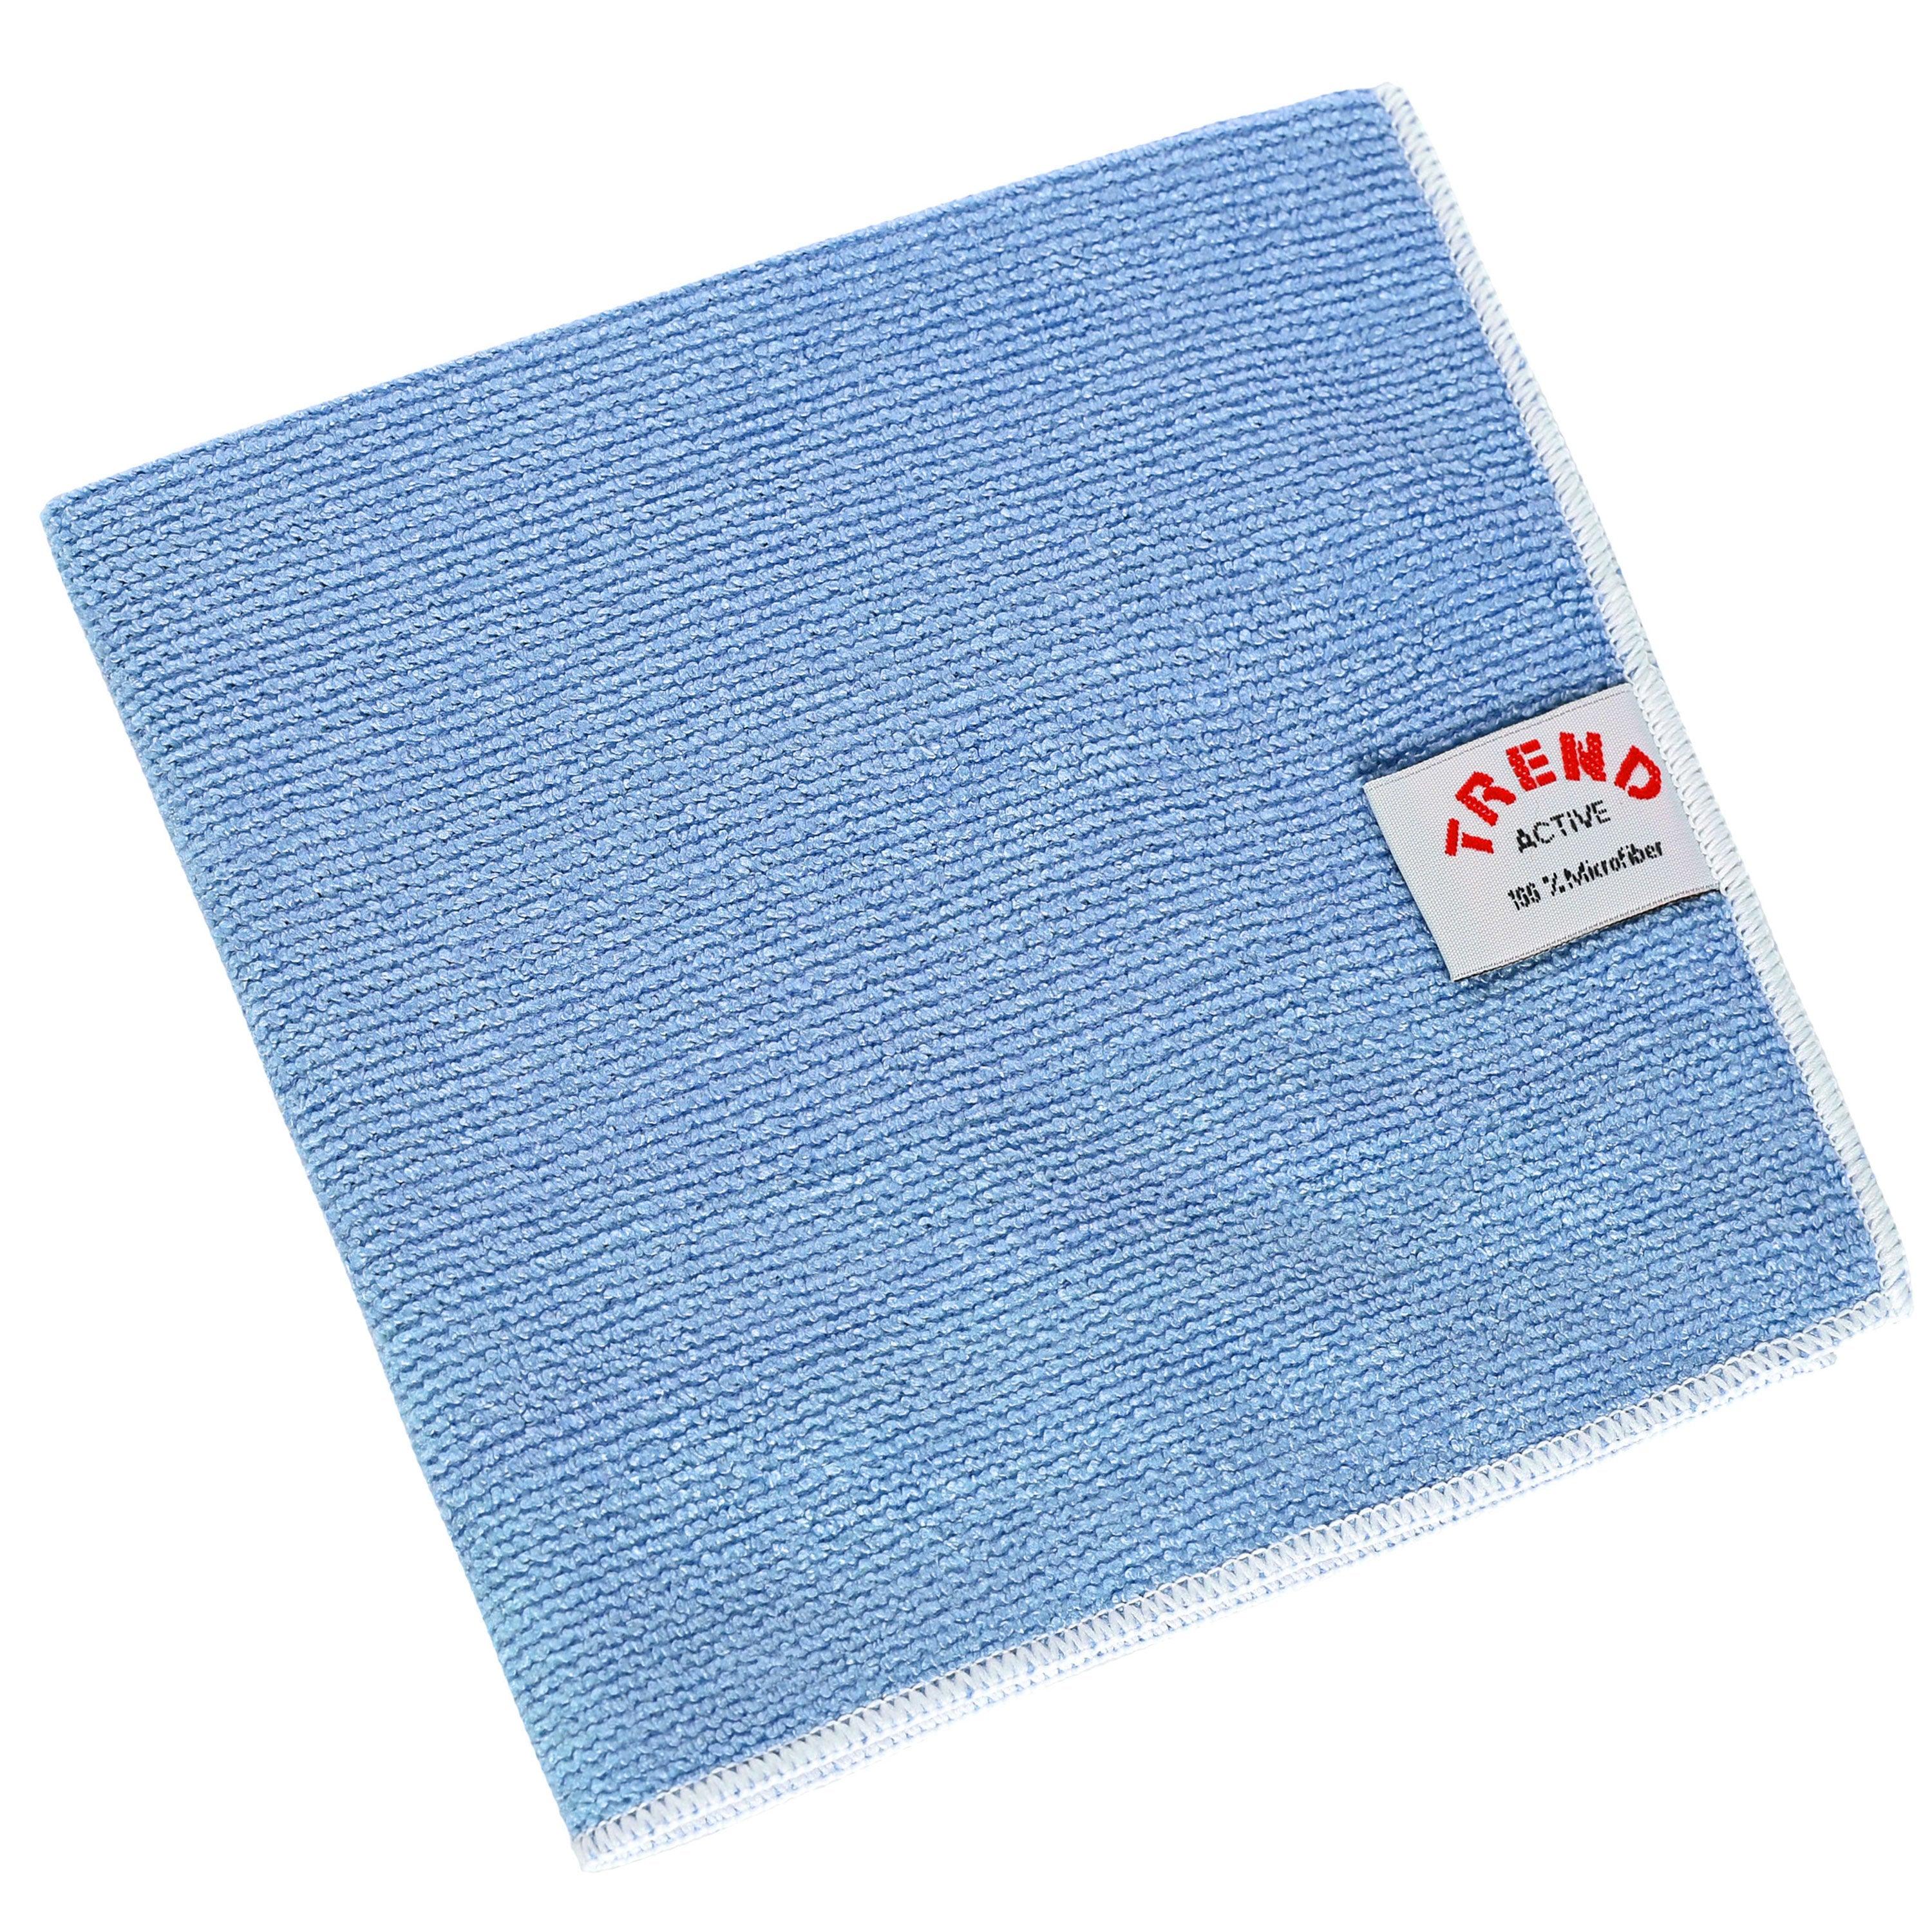 TREND Active Manufaktur Microfaser Wundertuch - blau - TREND Products AT